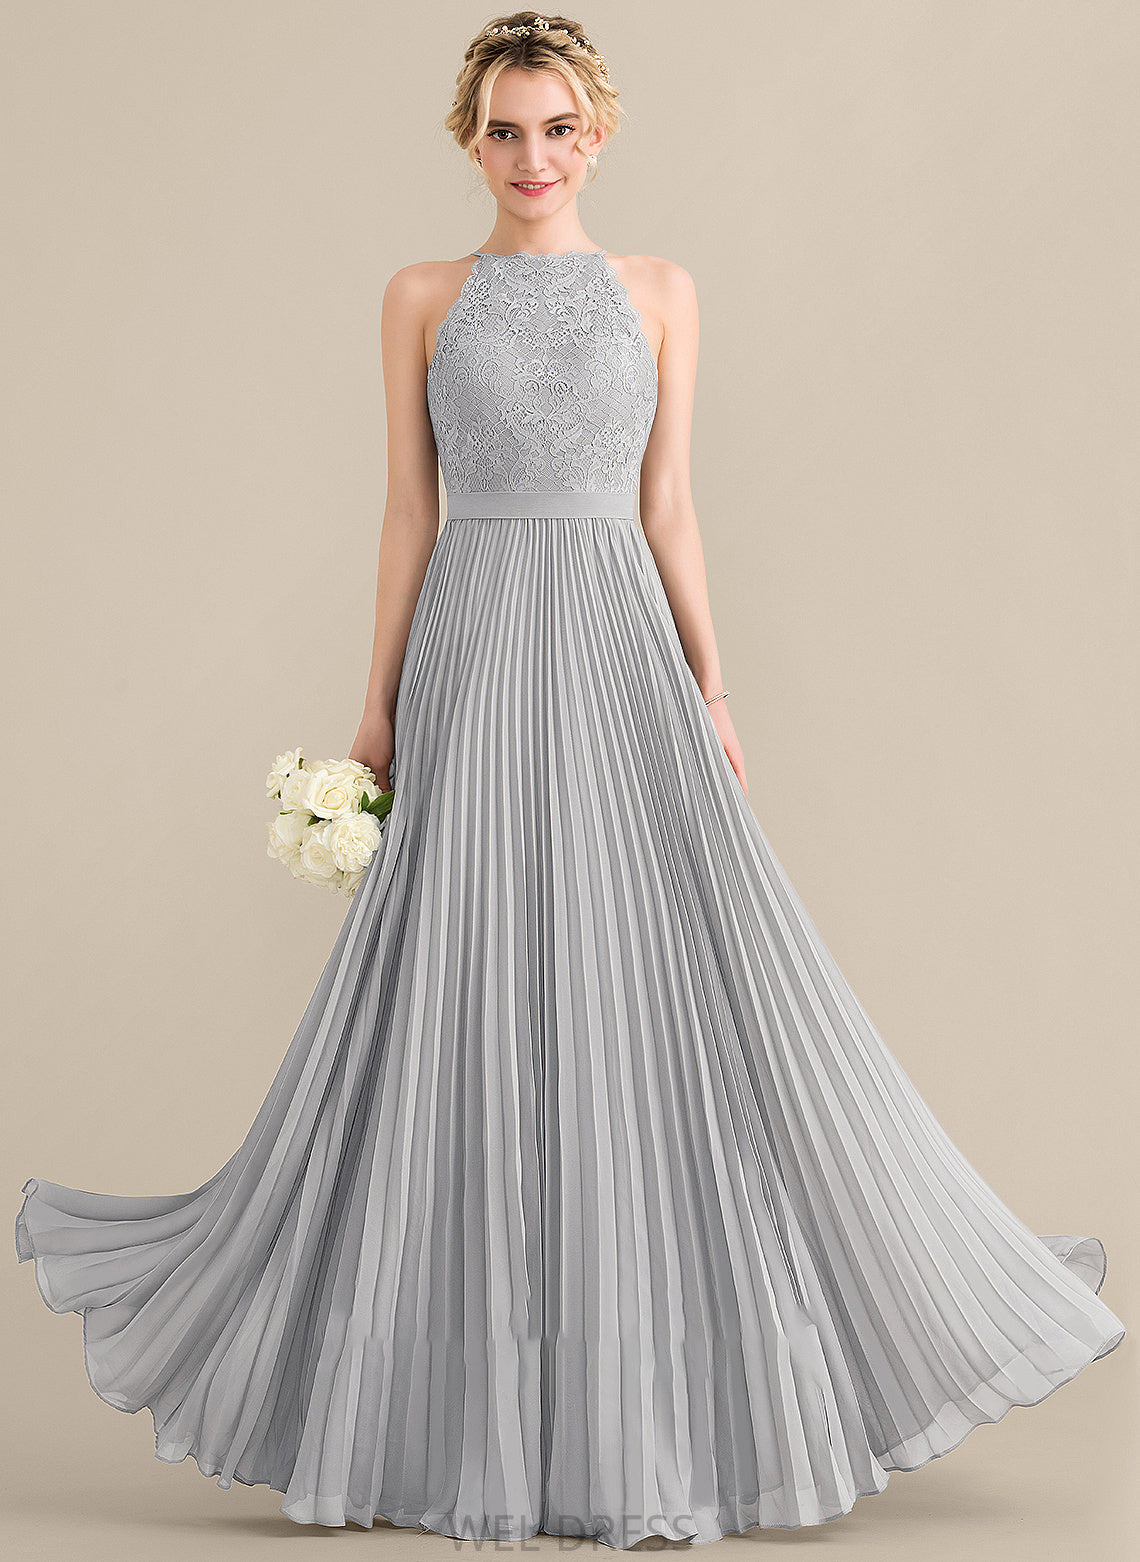 Lace Neck With Carleigh Pleated Floor-Length A-Line Scoop Prom Dresses Chiffon